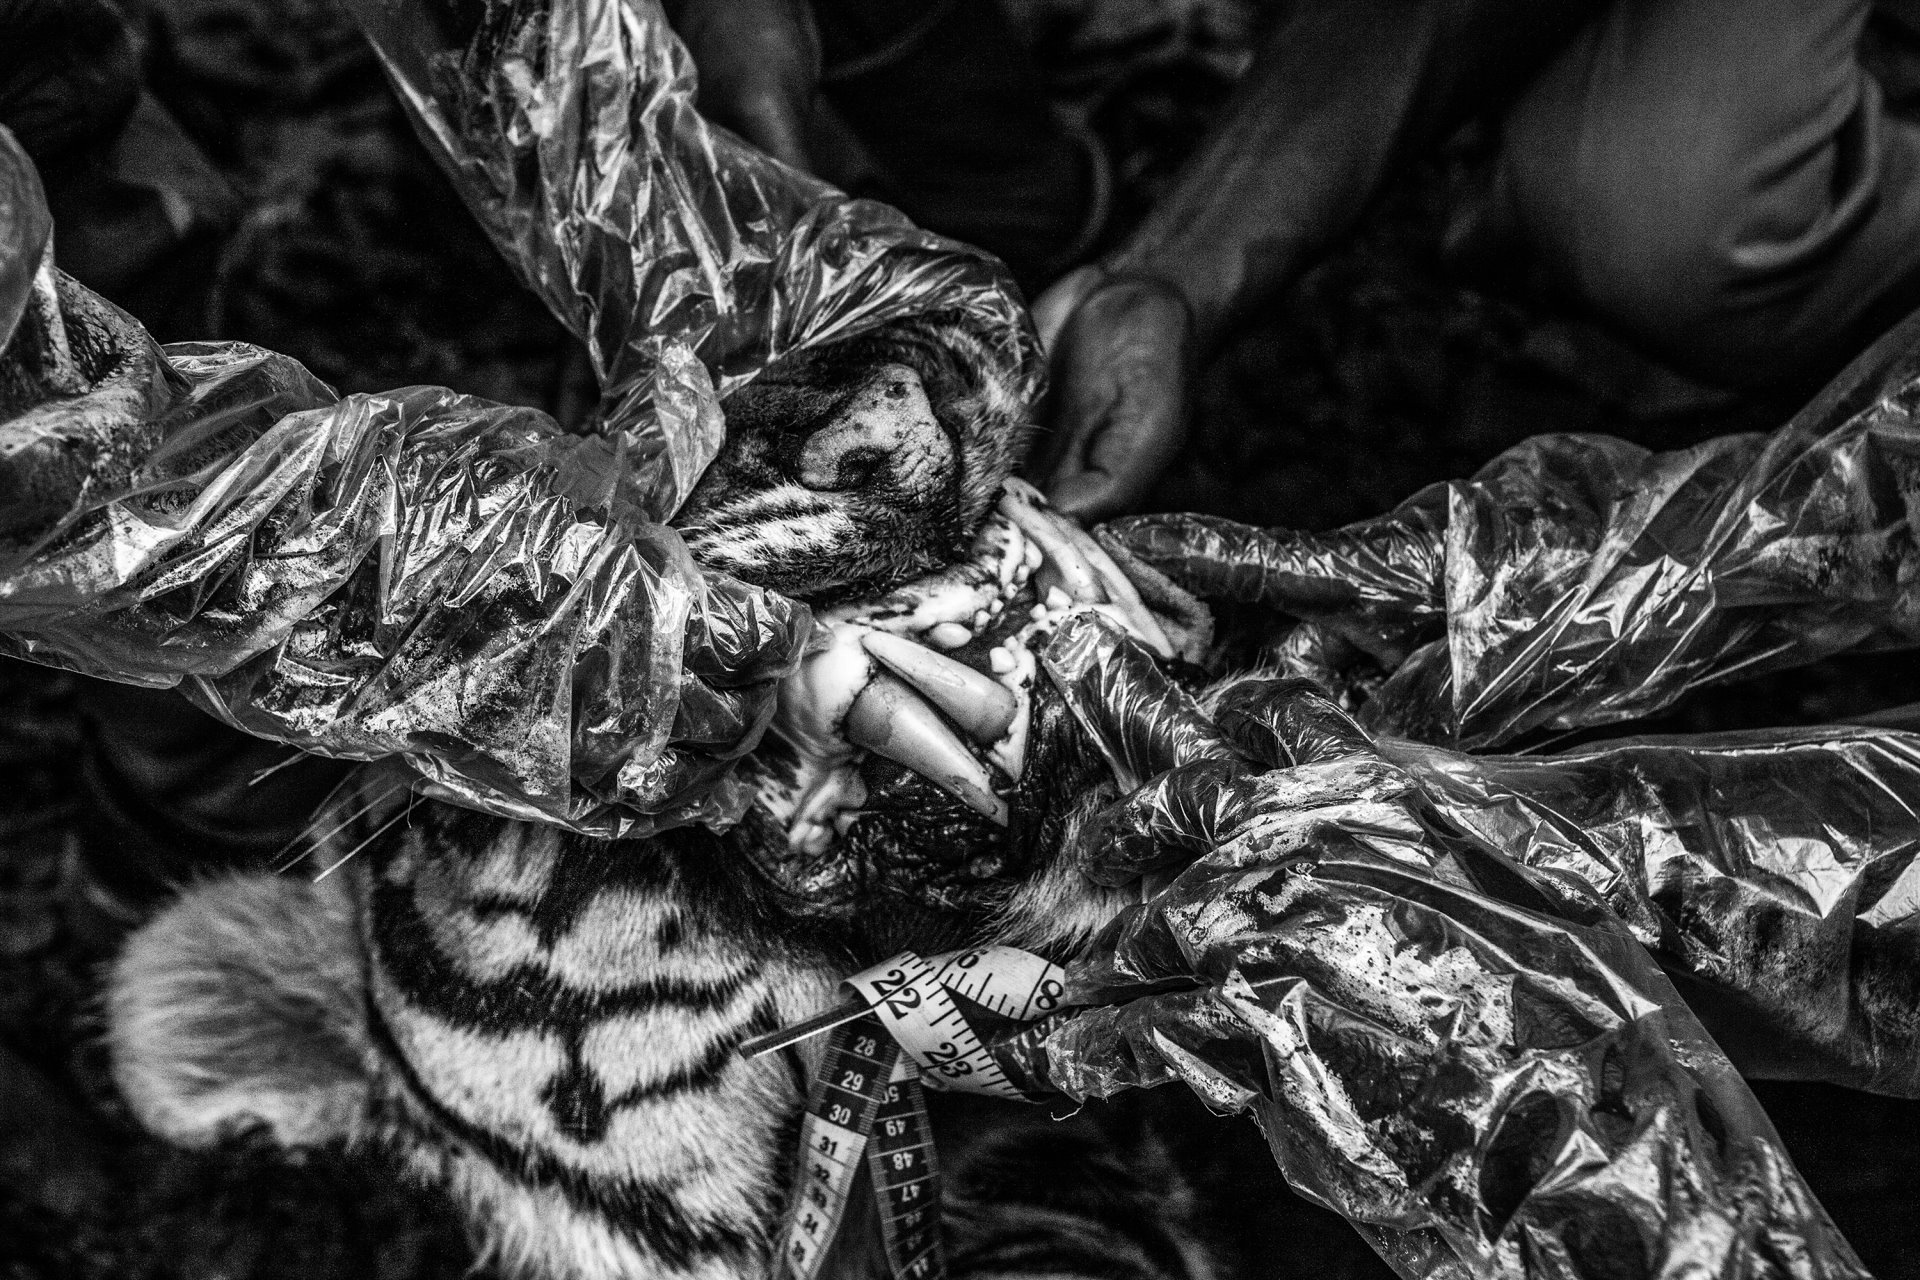 <p>Forest officials and veterinarians perform a post mortem on a tiger to test for poison, near the Anamalai Tiger Reserve, Tamil Nadu, India.</p>
